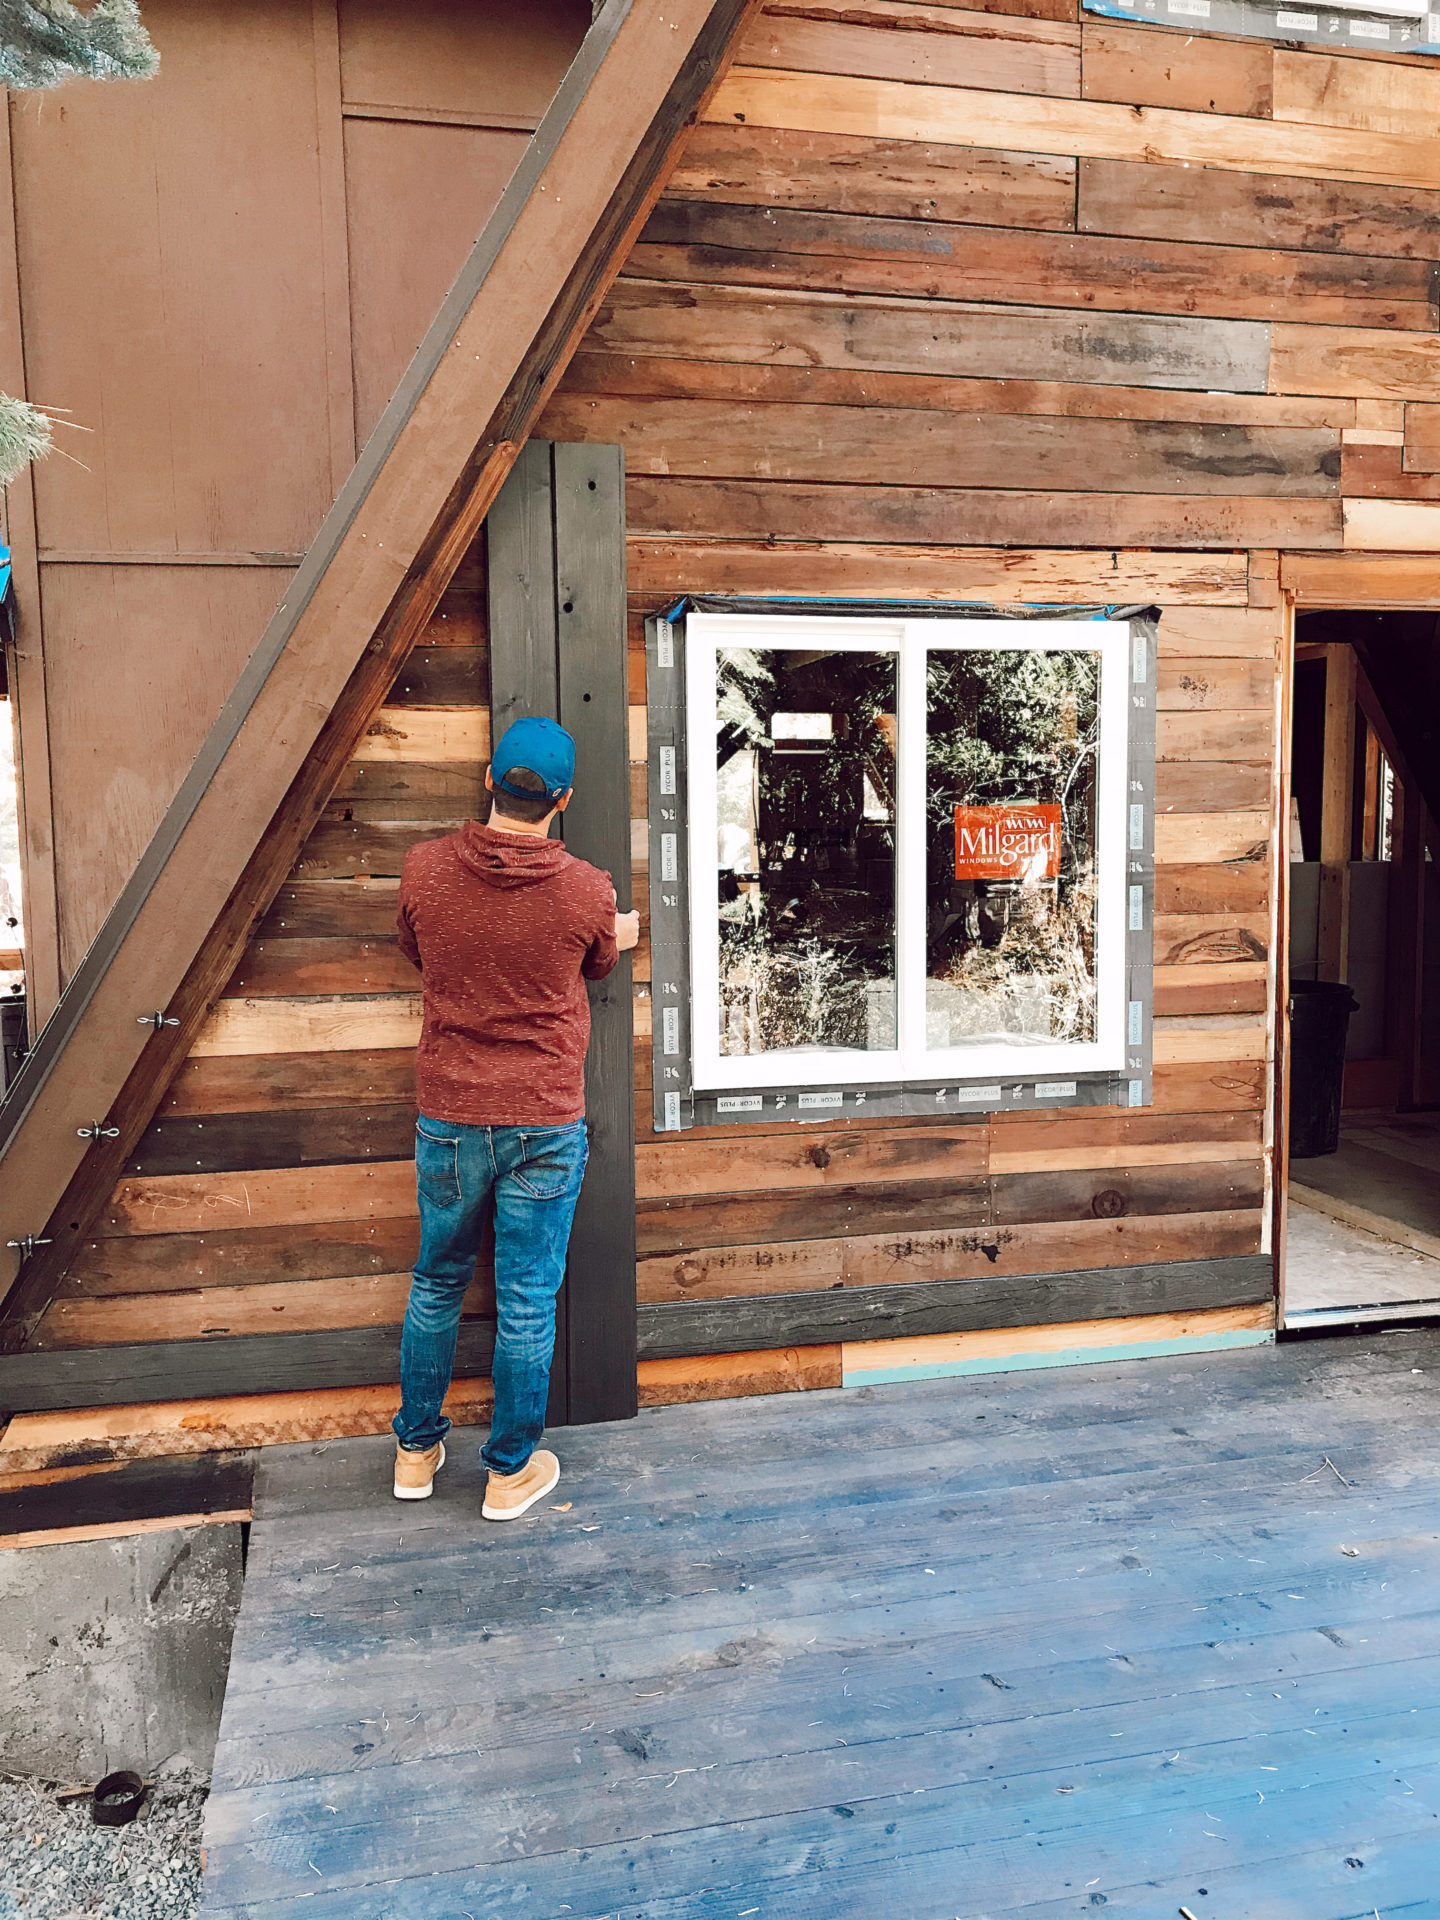 milgard windows | Milgard Windows by popular San Francisco life and style blog, Just Add Glam: image of a man installing some Milgard windows in a A-Frame cabin. 